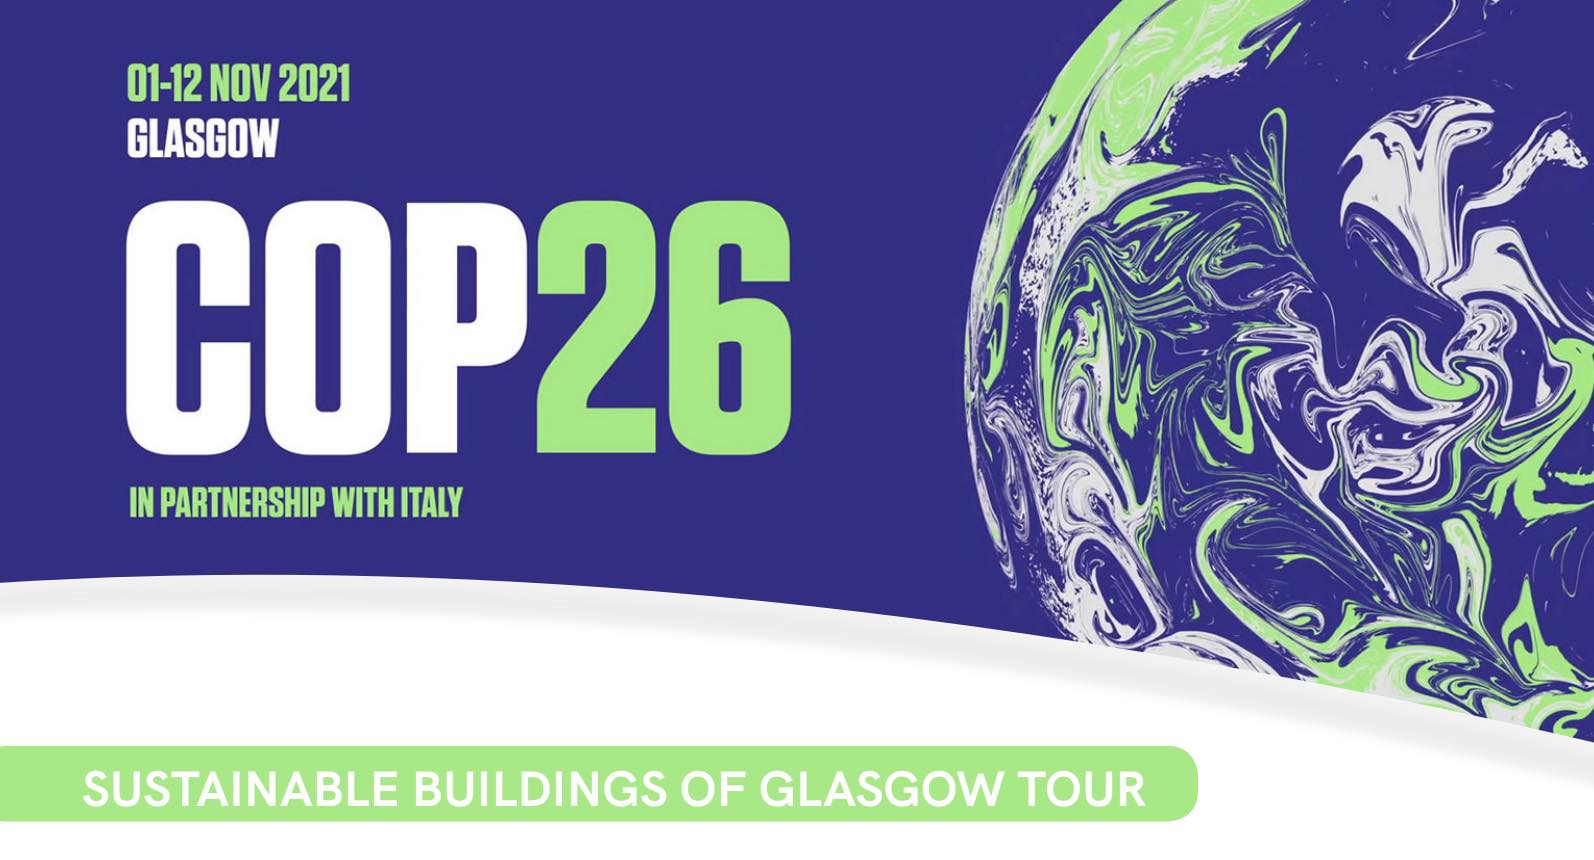 SUSTAINABLE BUILDINGS OF GLASGOW TOUR